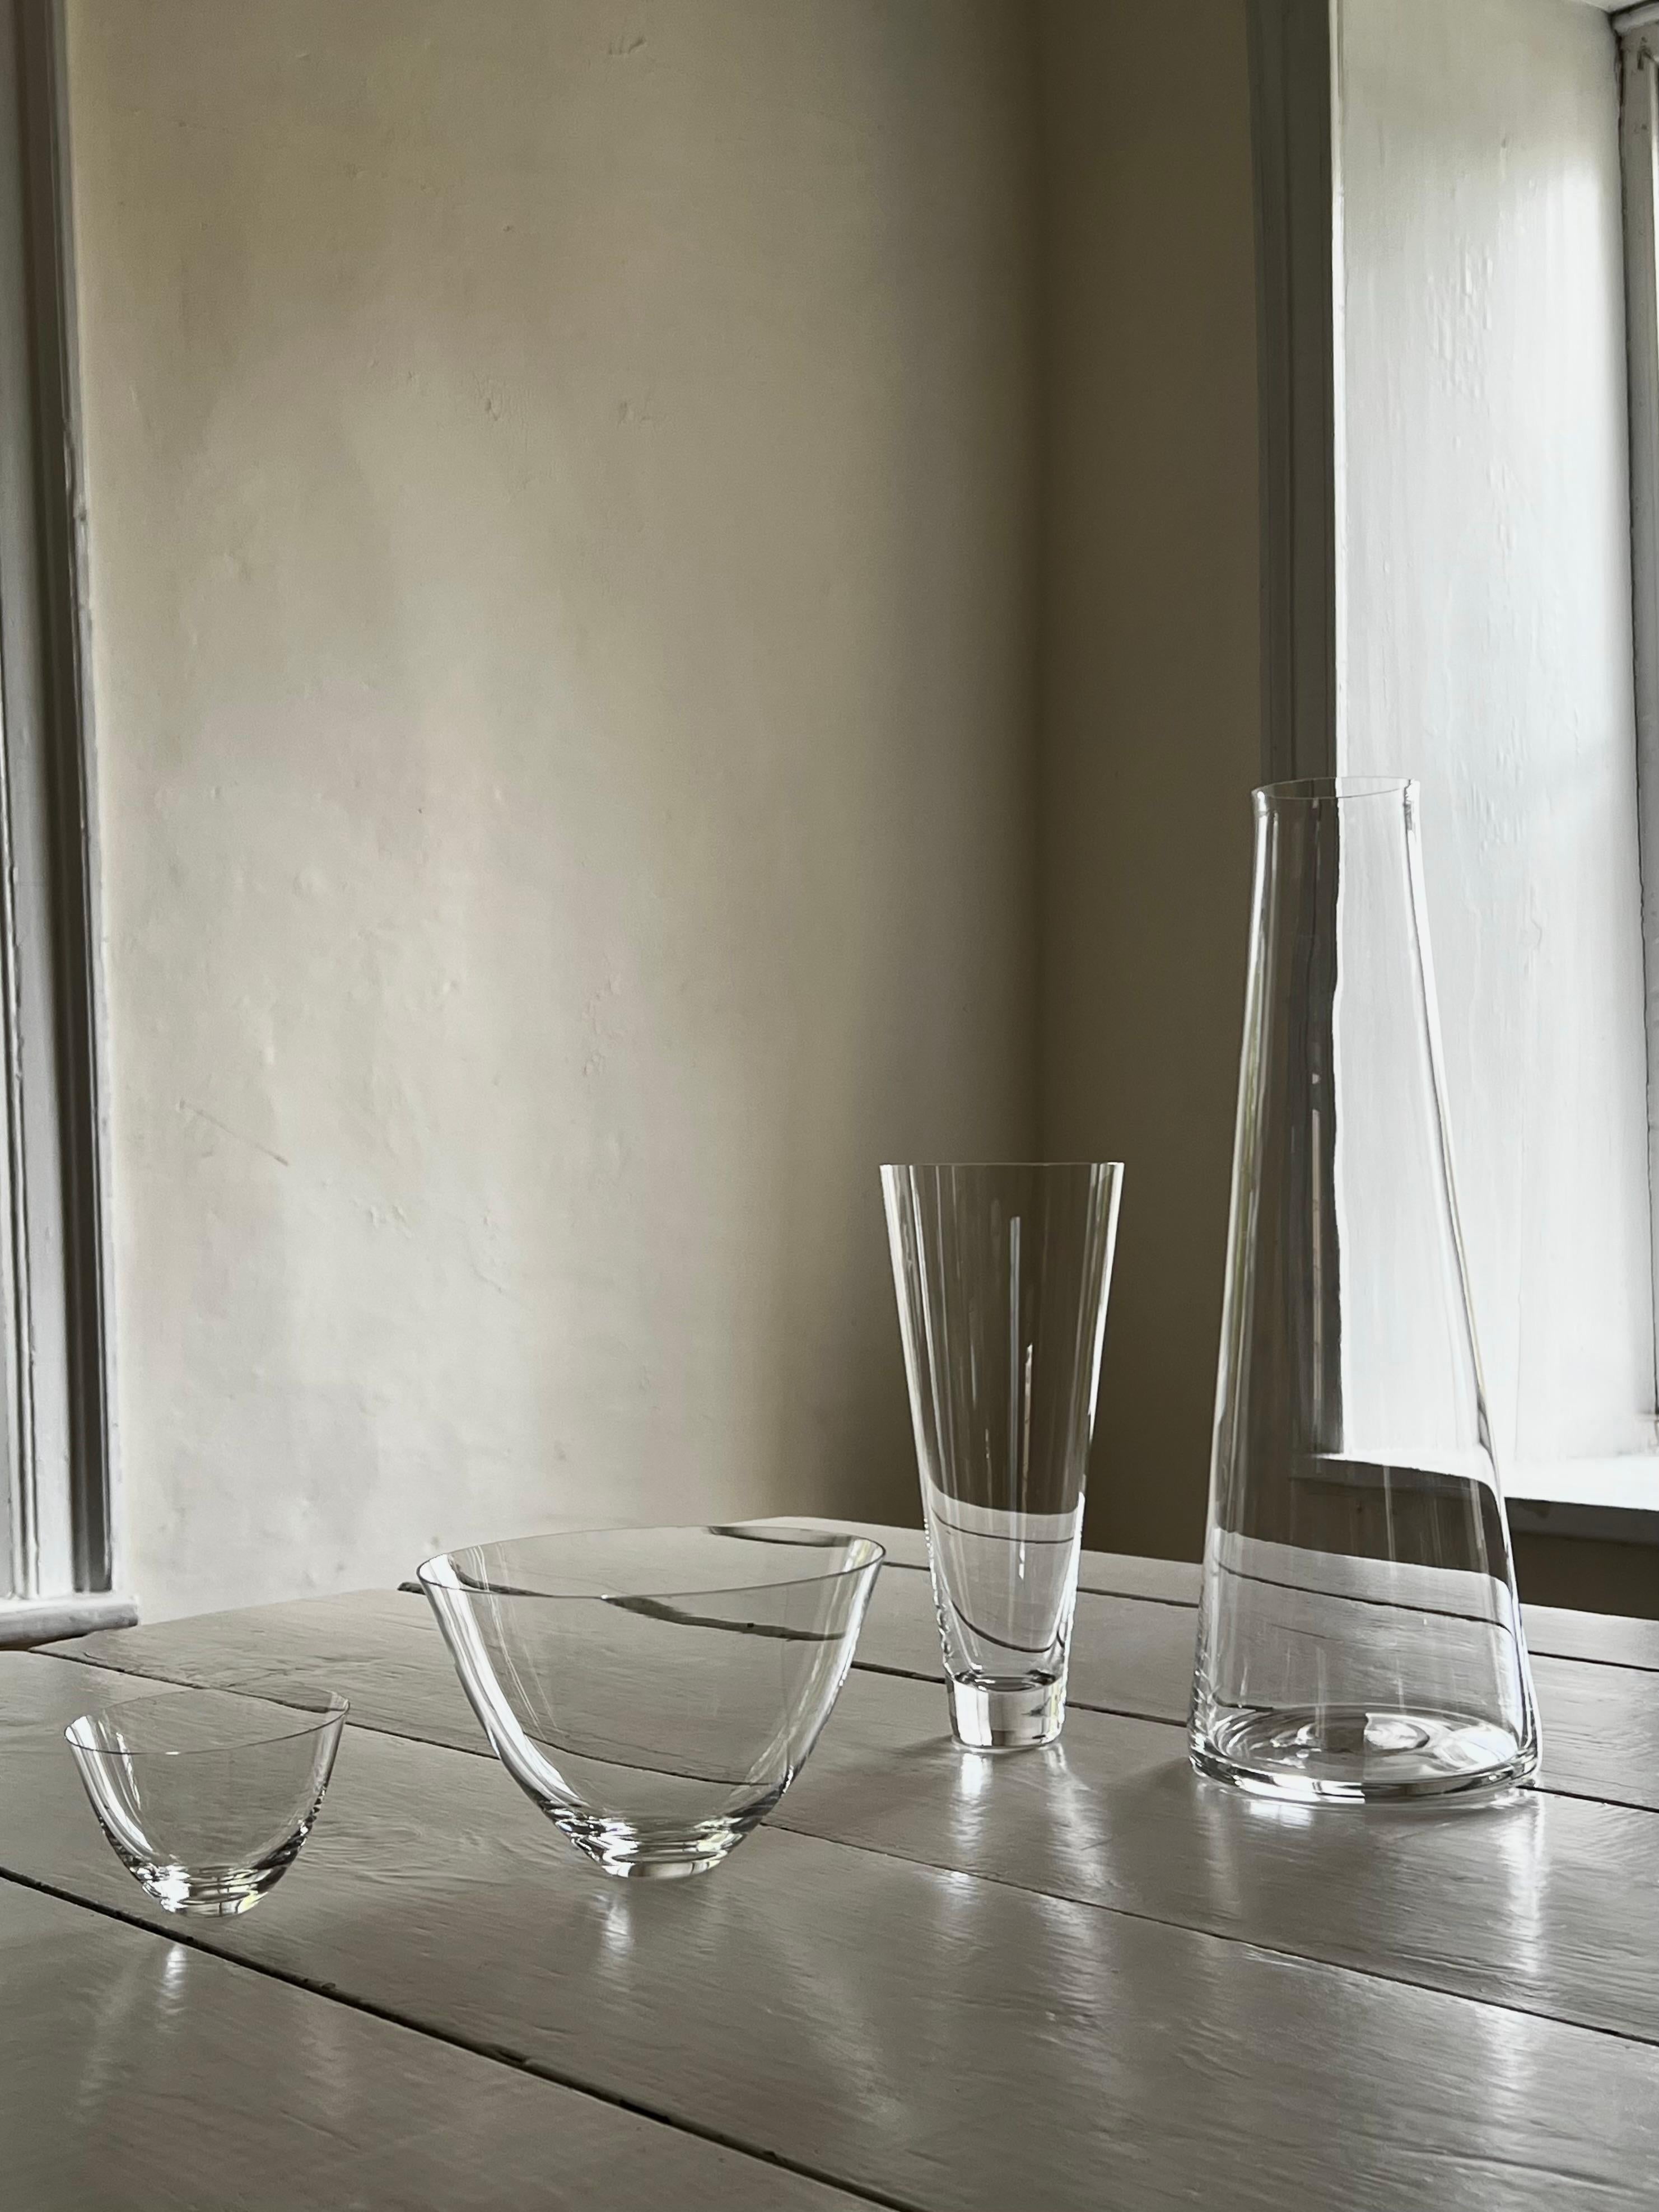 Launched with Takashimaya in 1999, these handblown crystal pilsner glasses have become a modern Classic. Each Deborah Ehrlich piece is designed for the extraordinary strength and clarity of Swedish crystal. The simplicity of the design, the thinness